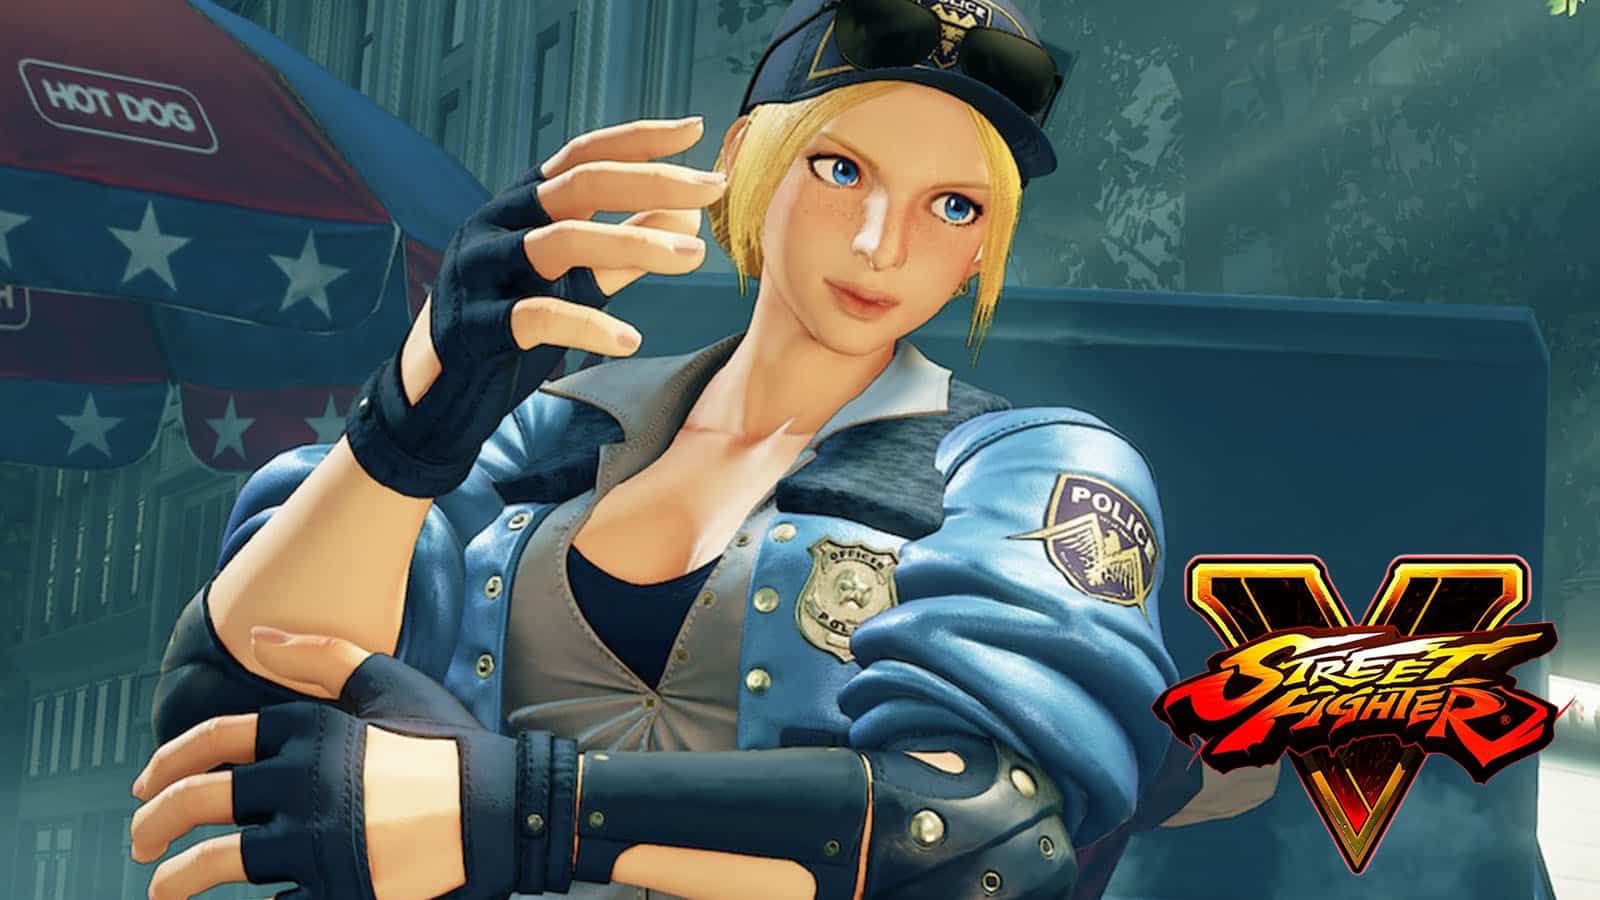 Leak” claims Street Fighter V is coming to Nintendo Switch - Dexerto